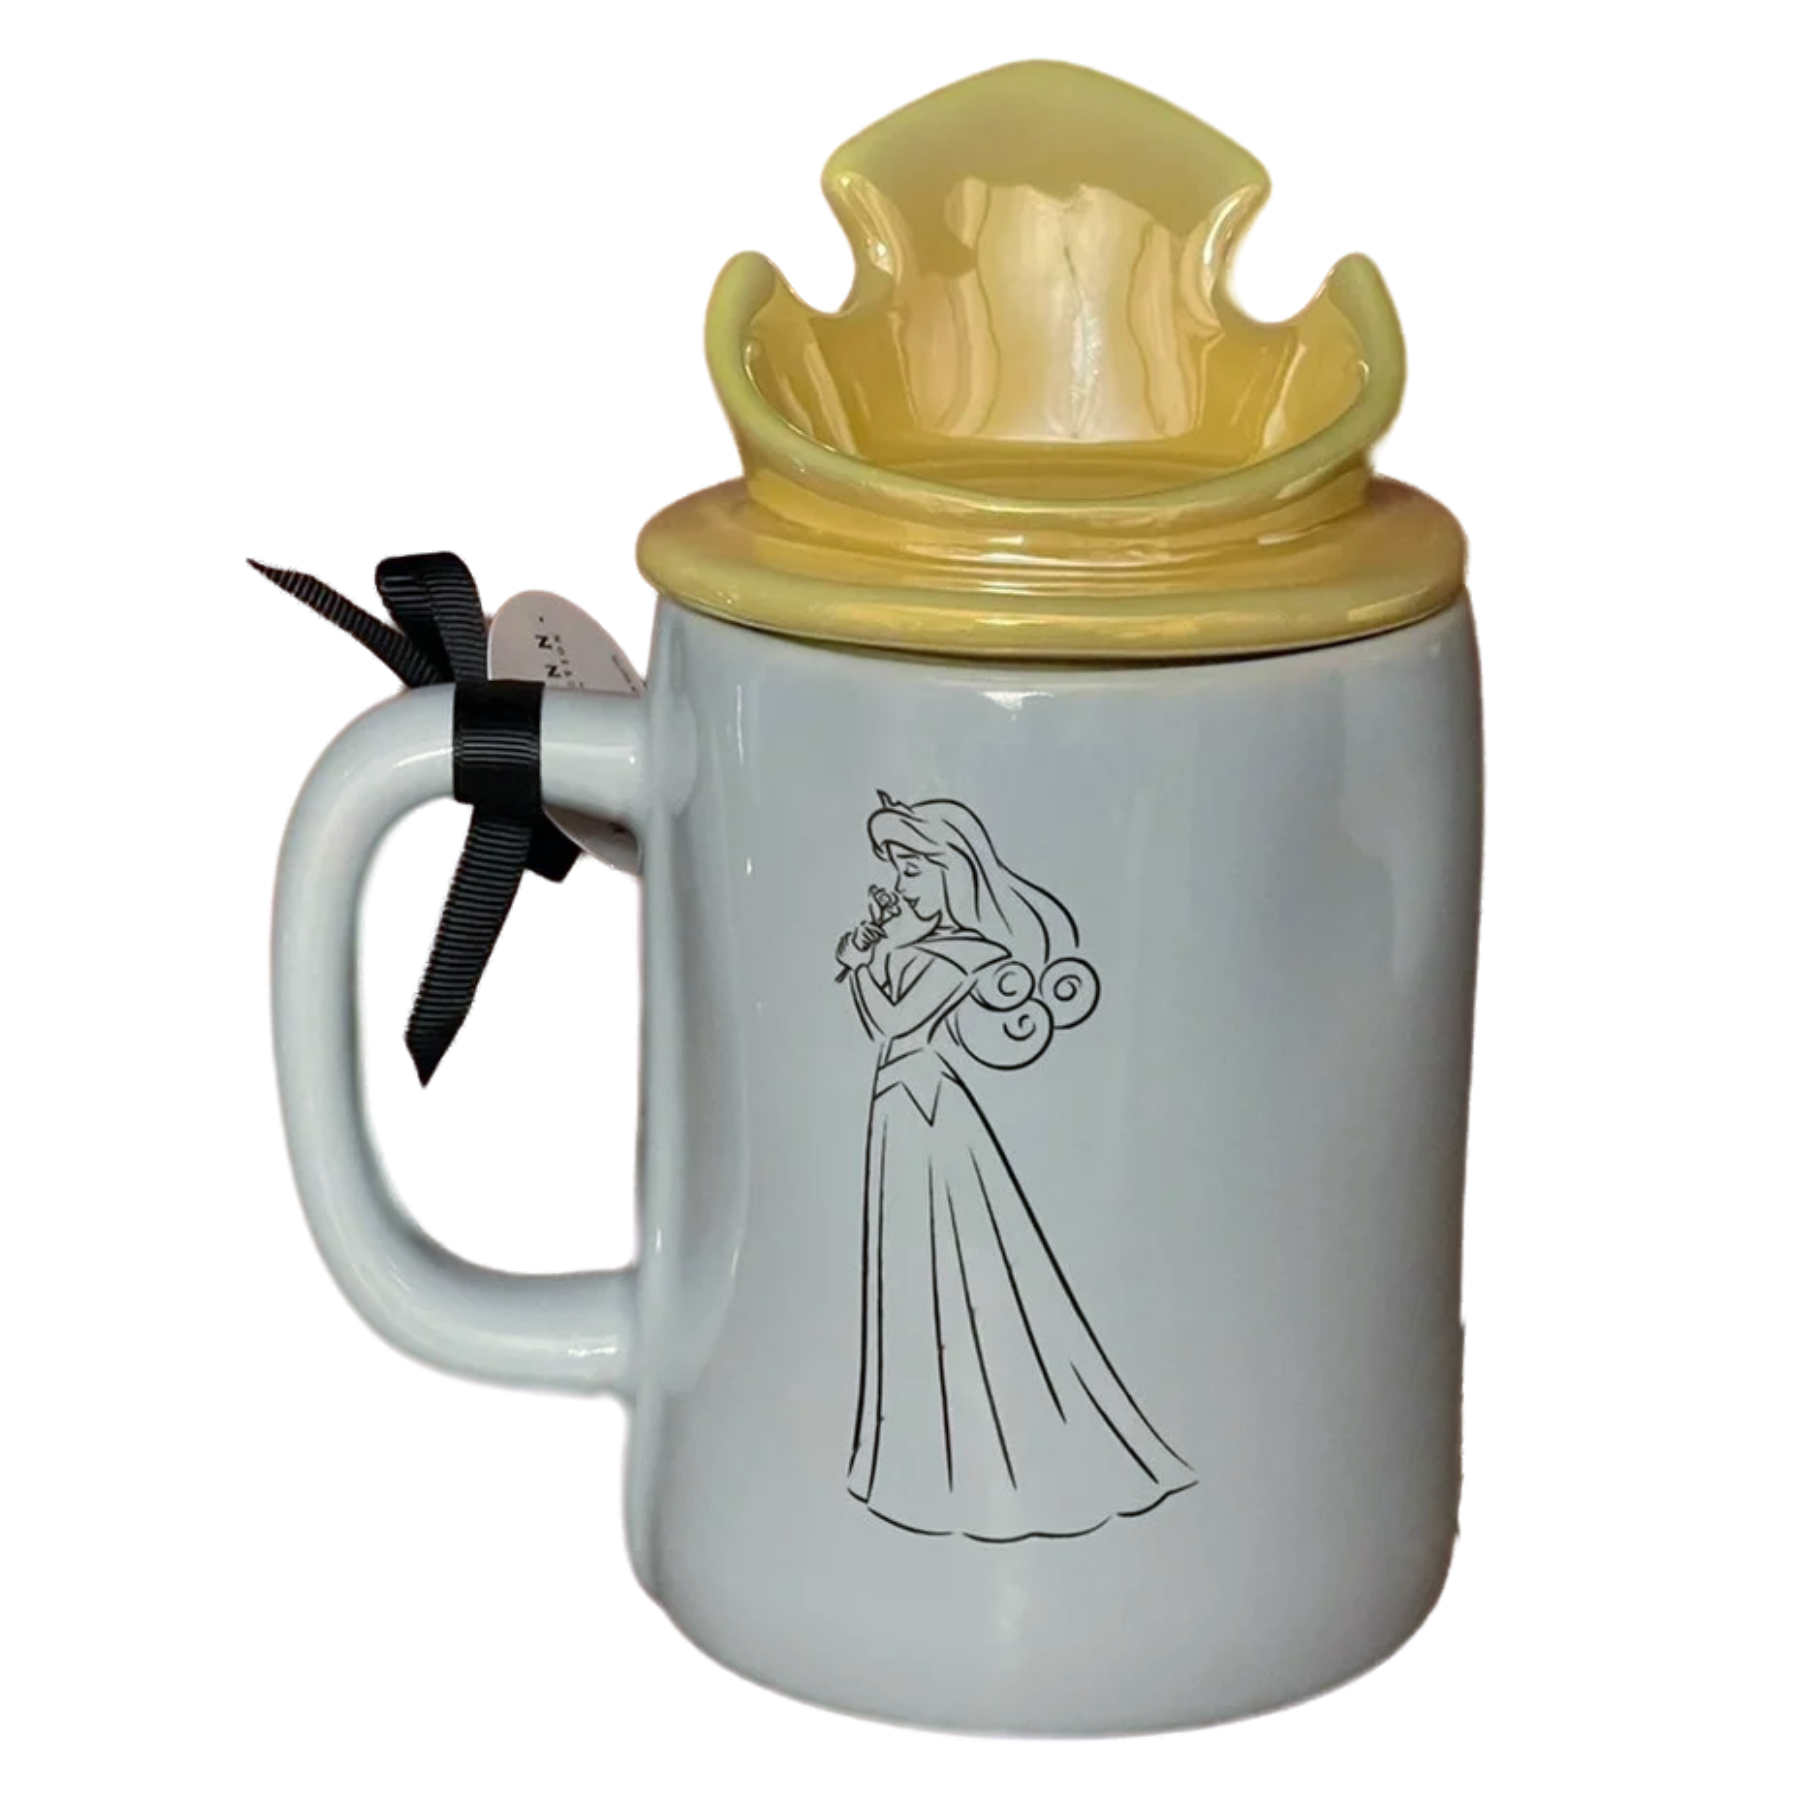 Rae Dunn ONCE UPON A DREAM Mug - Double sided - Ceramic - Blue - with tags  Gold Princess Crown topper - Dishwasher and Microwave Safe - 16 oz :  : Home